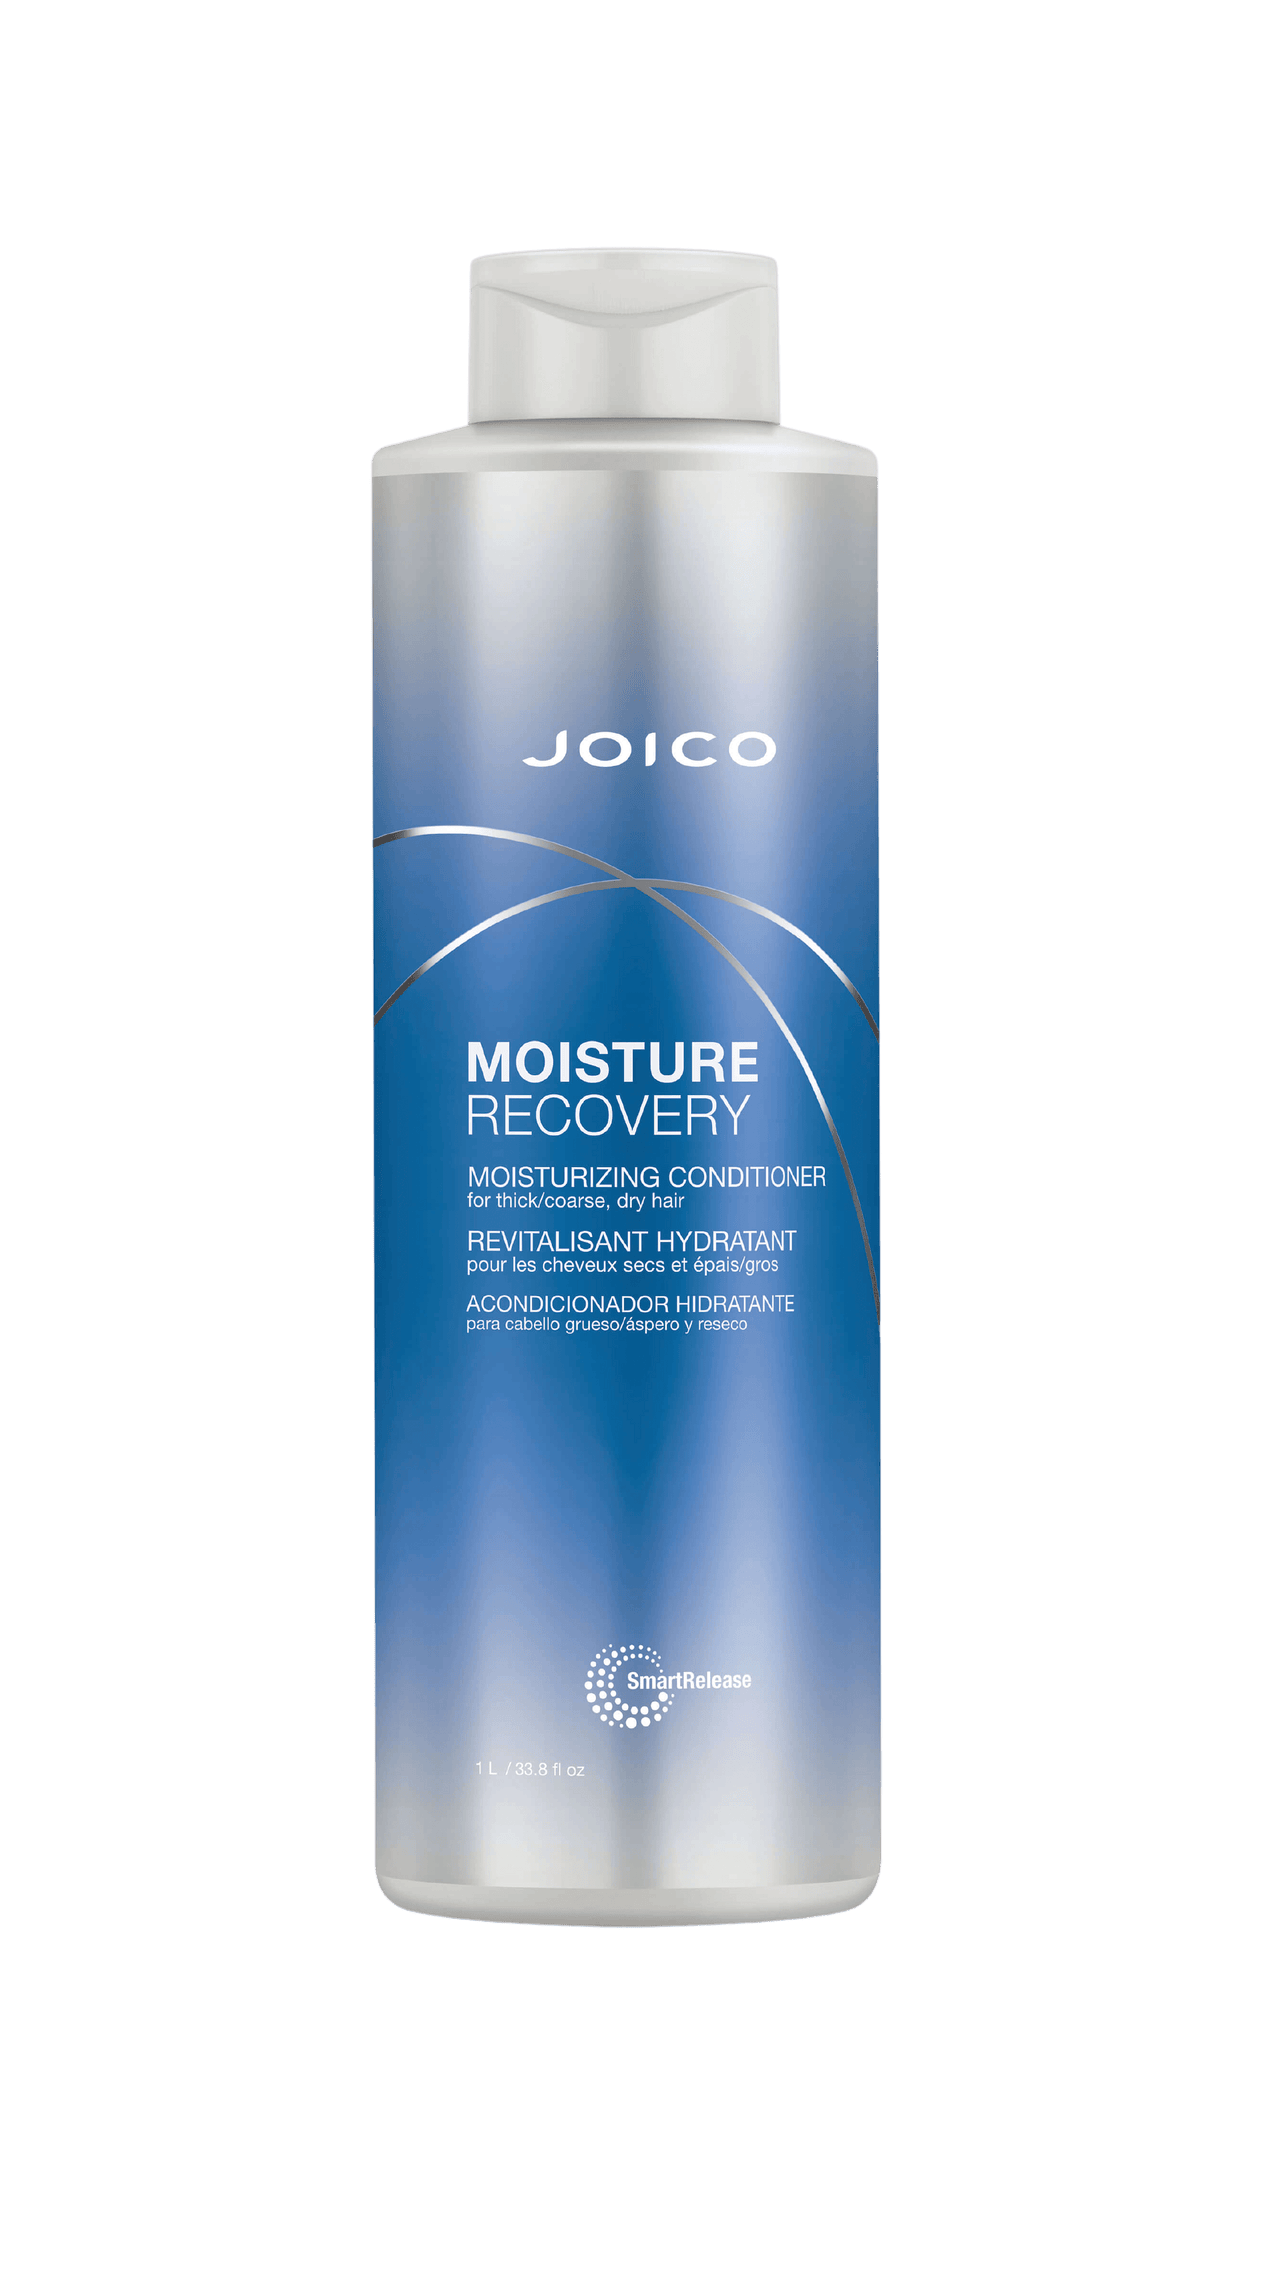 Joico Moisture Recovery Conditioner 33.8oz Bottle